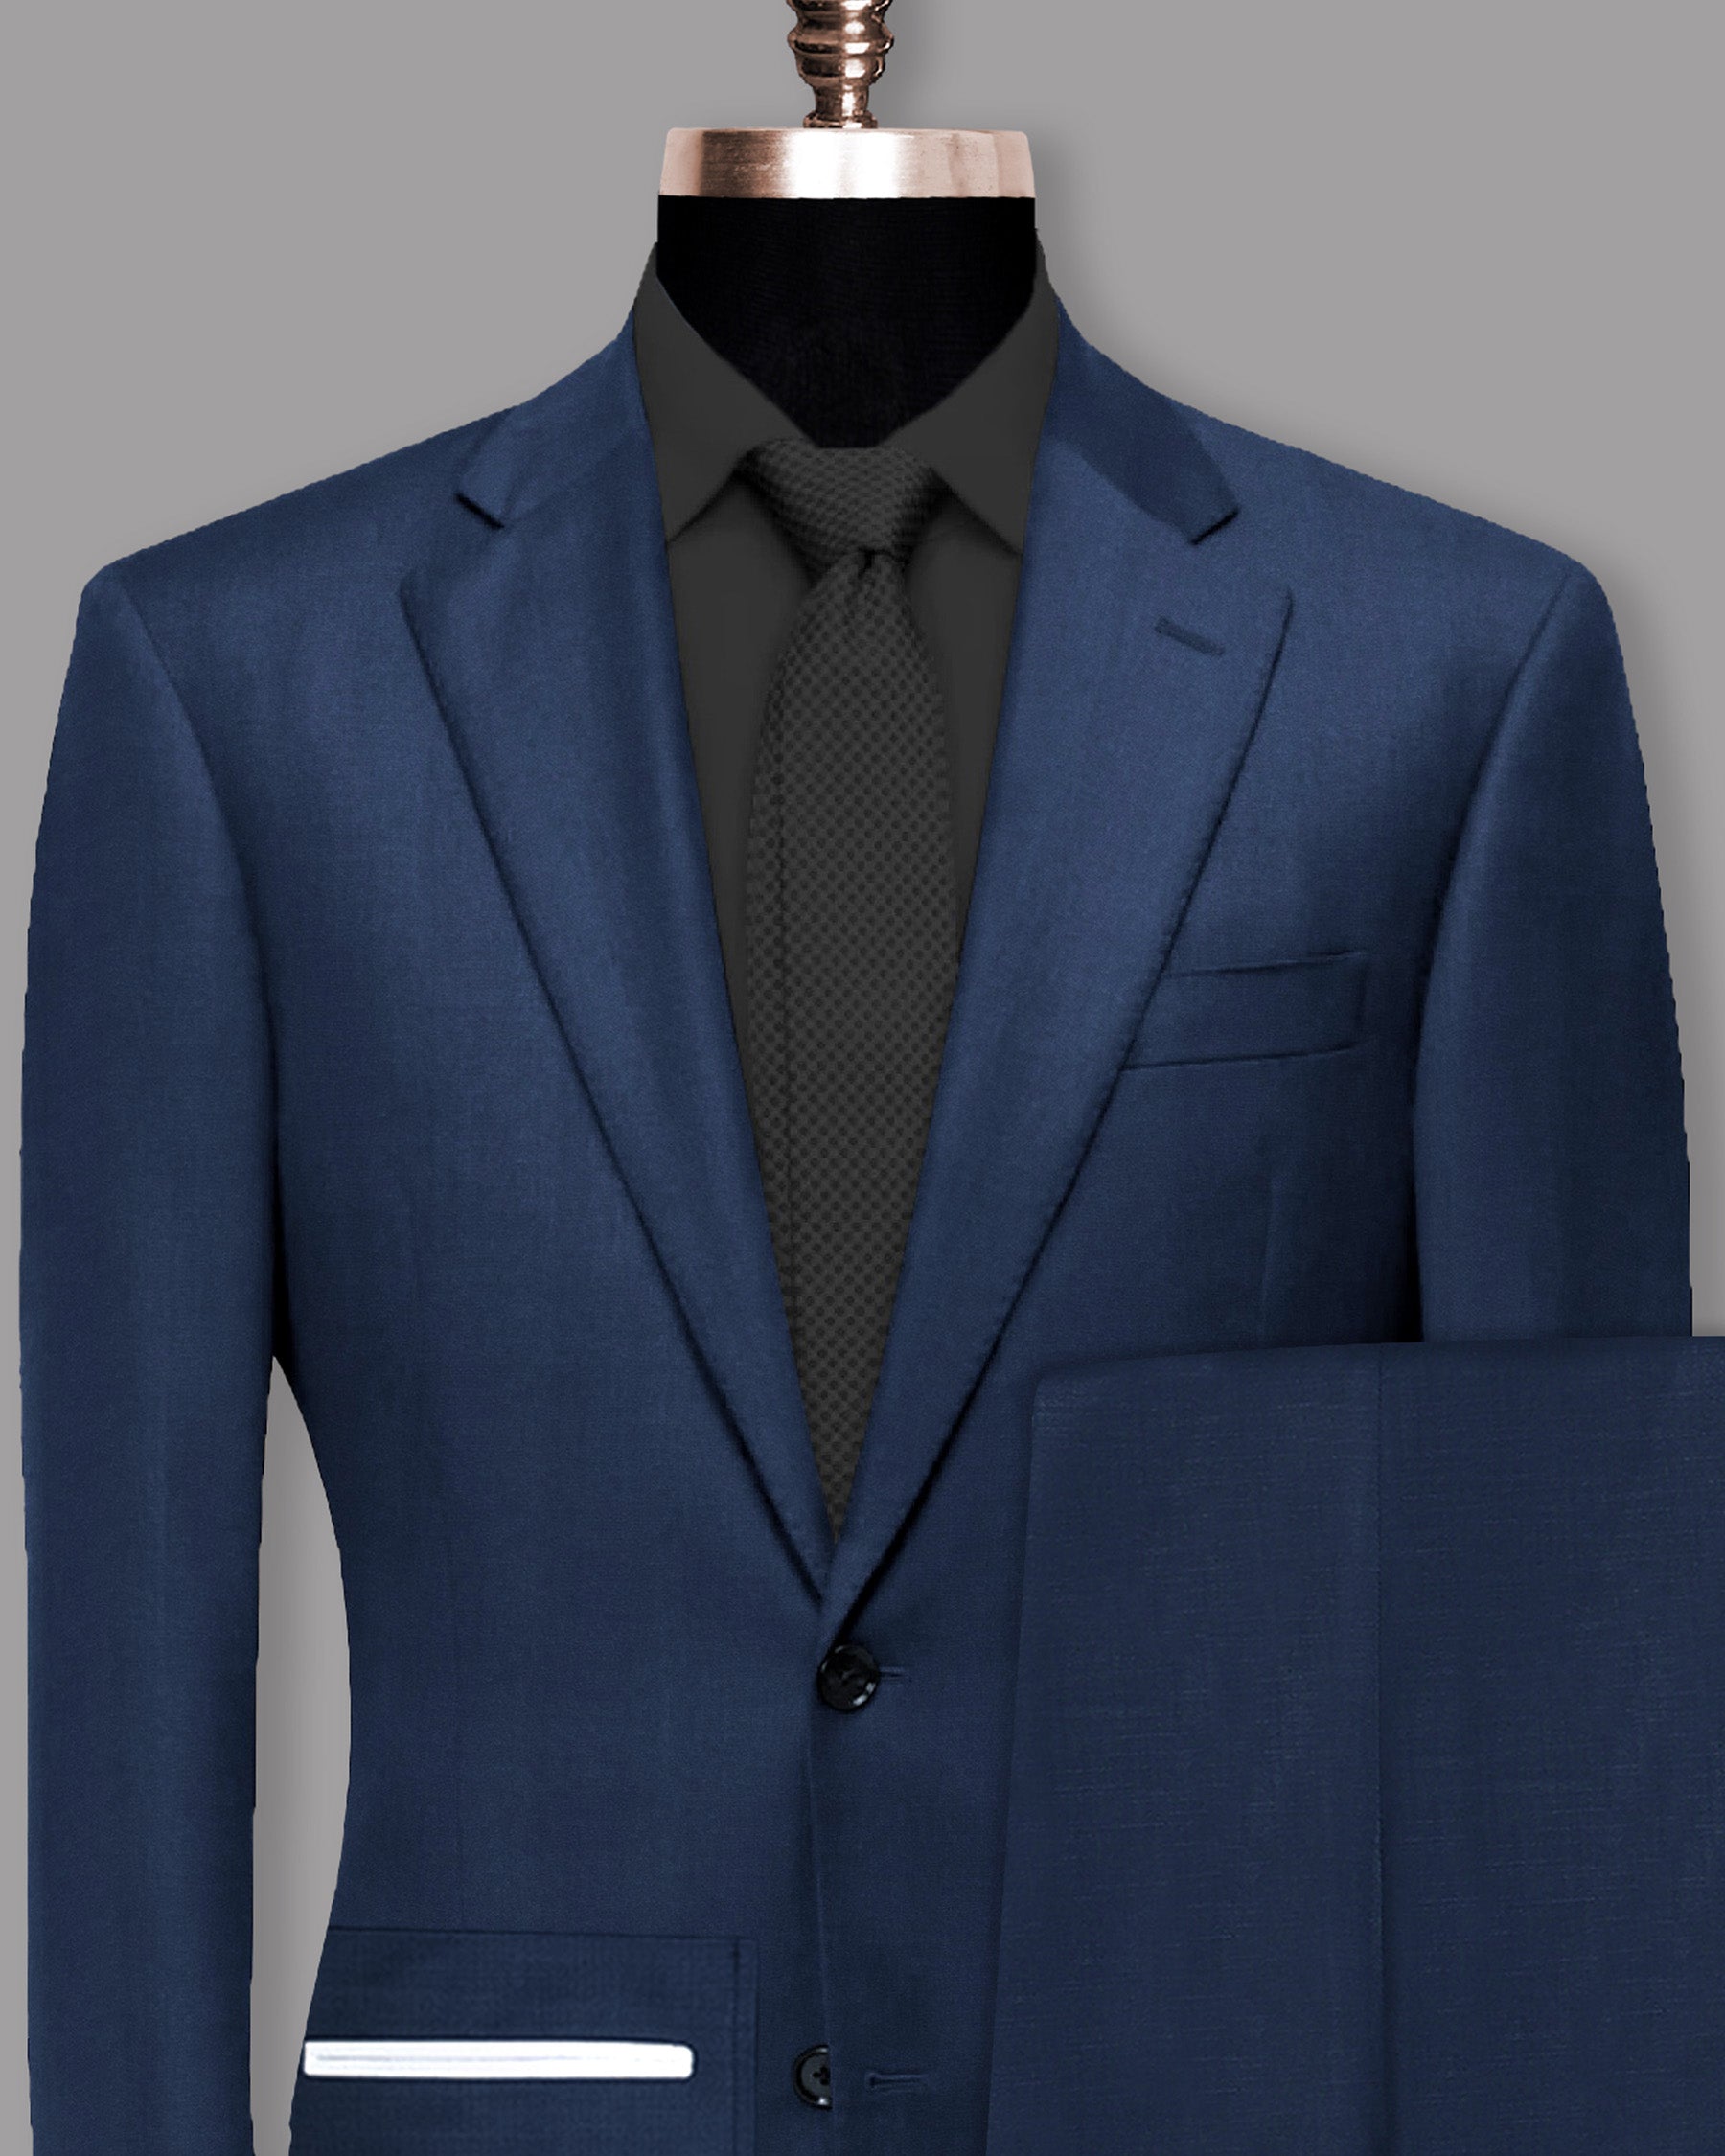 How To Add Combo With A Navy Blue Suit